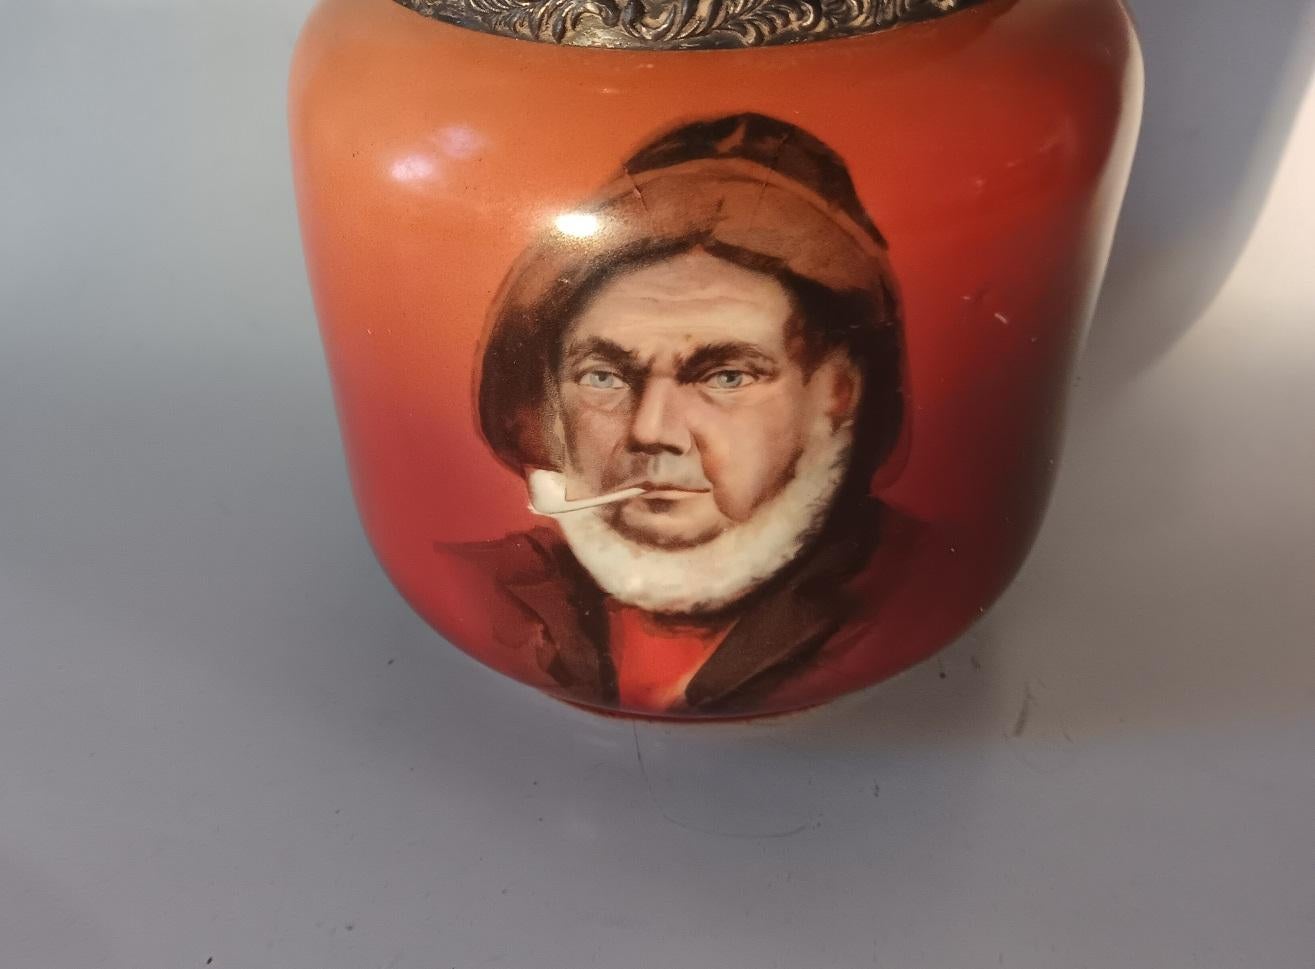 Antique early 20th century milk glass and silverplate humidor or cigar jar.  Painted exterior in orange and terra cotta with transferware image of a bearded sailor smoking a pipe.  Silver plated lid and rim, dark patina, with some scuffing and one